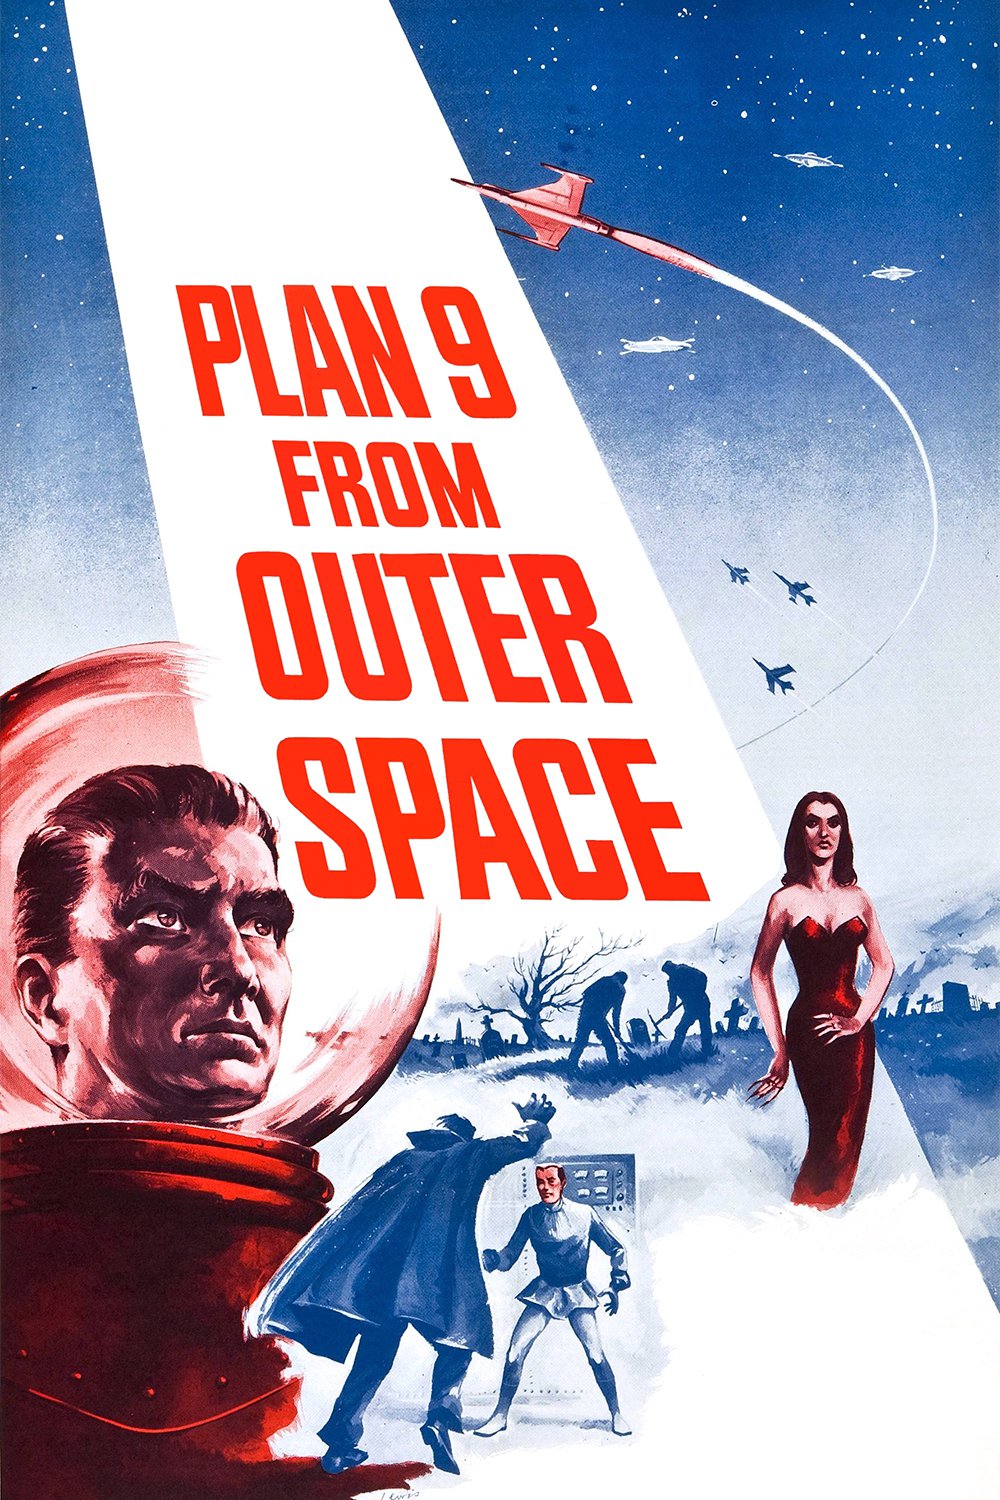 Poster for the movie "Plan 9 from Outer Space"